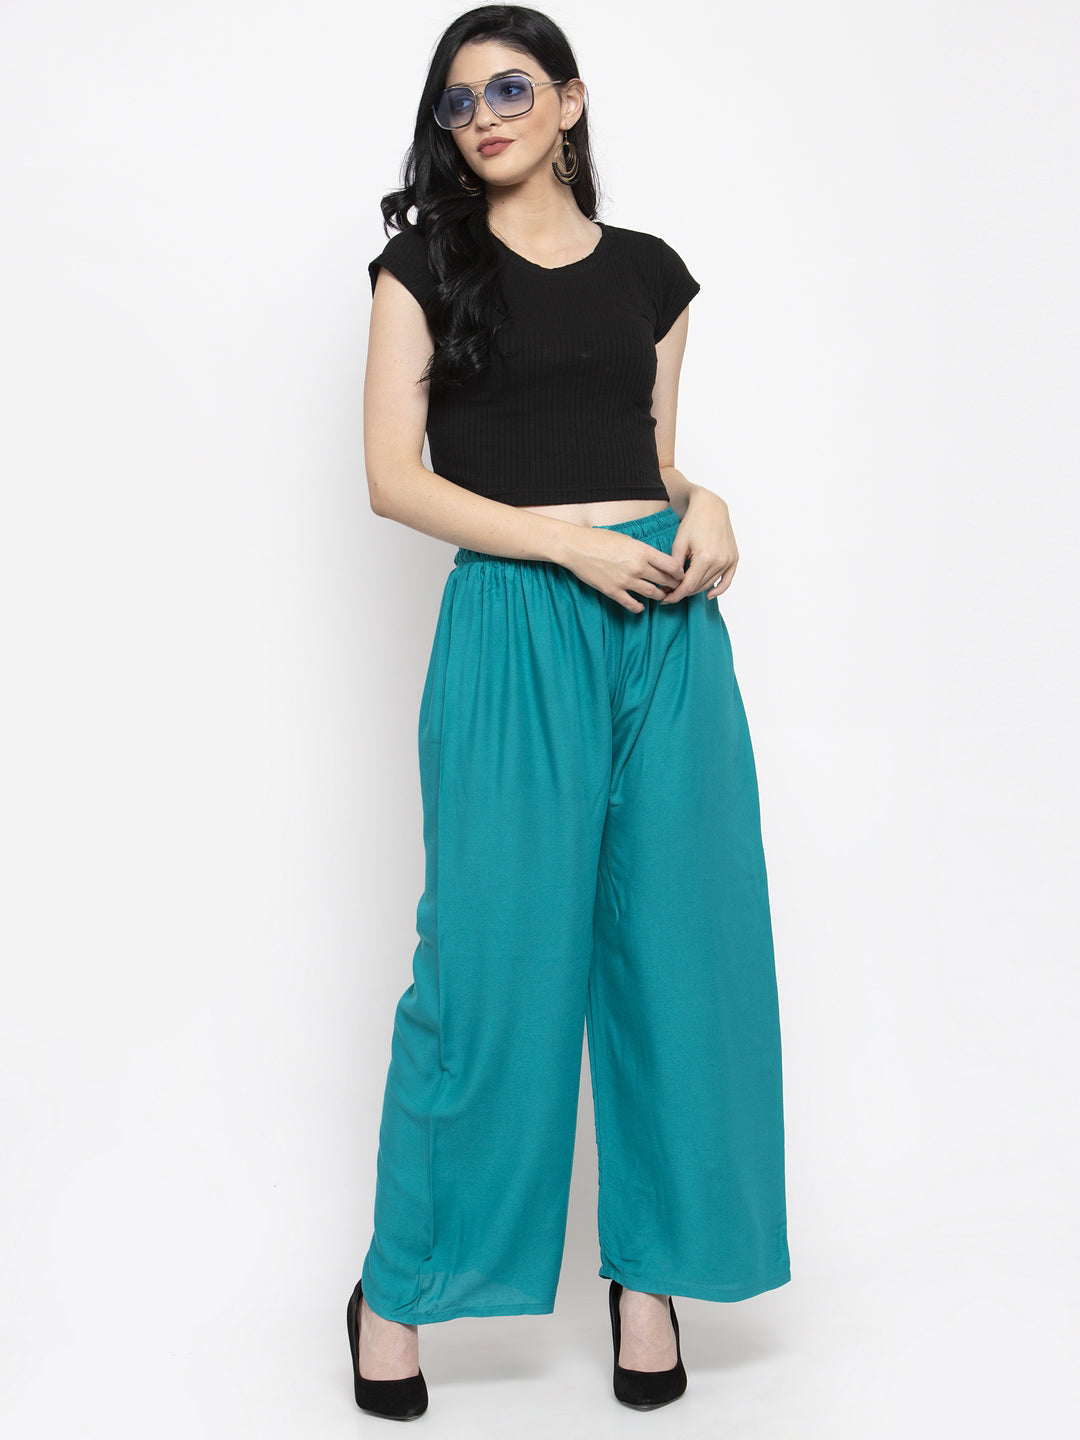 Women's Solid Off-White & Turquoise Rayon Palazzo (Pack Of 2) - Wahe-NOOR